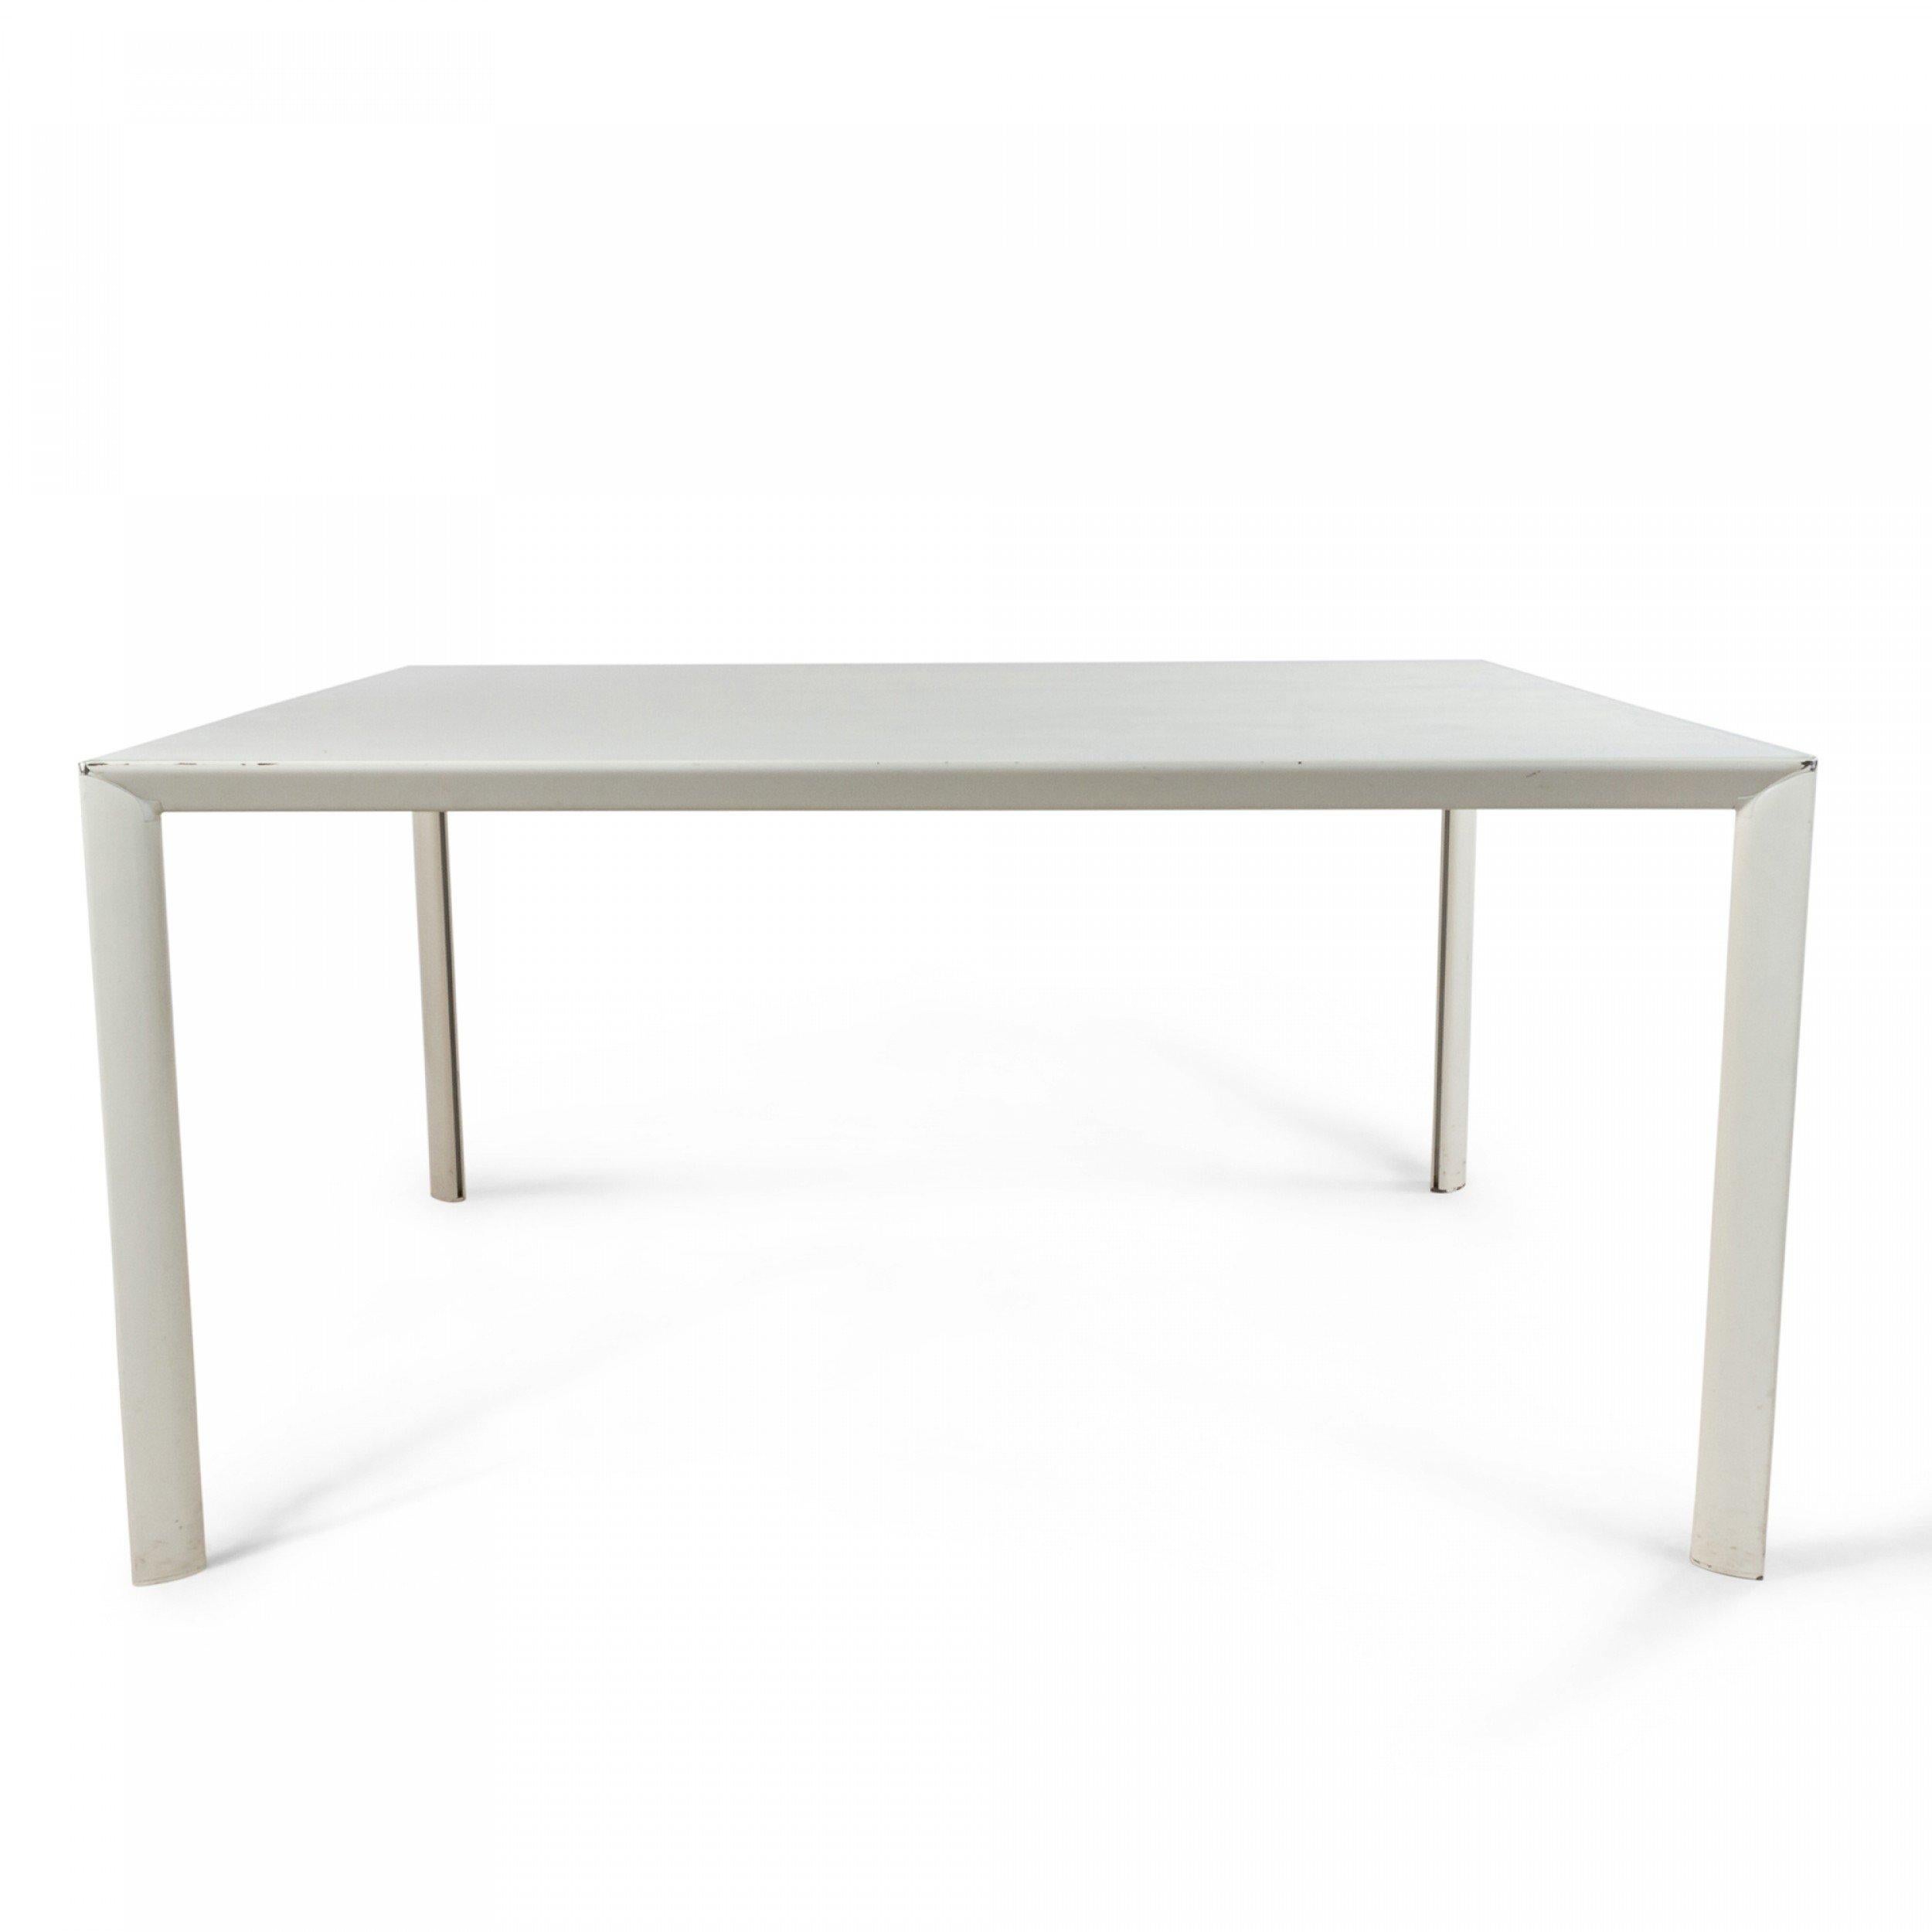 Modern Contemporary White Metal Square Work Tables For Sale